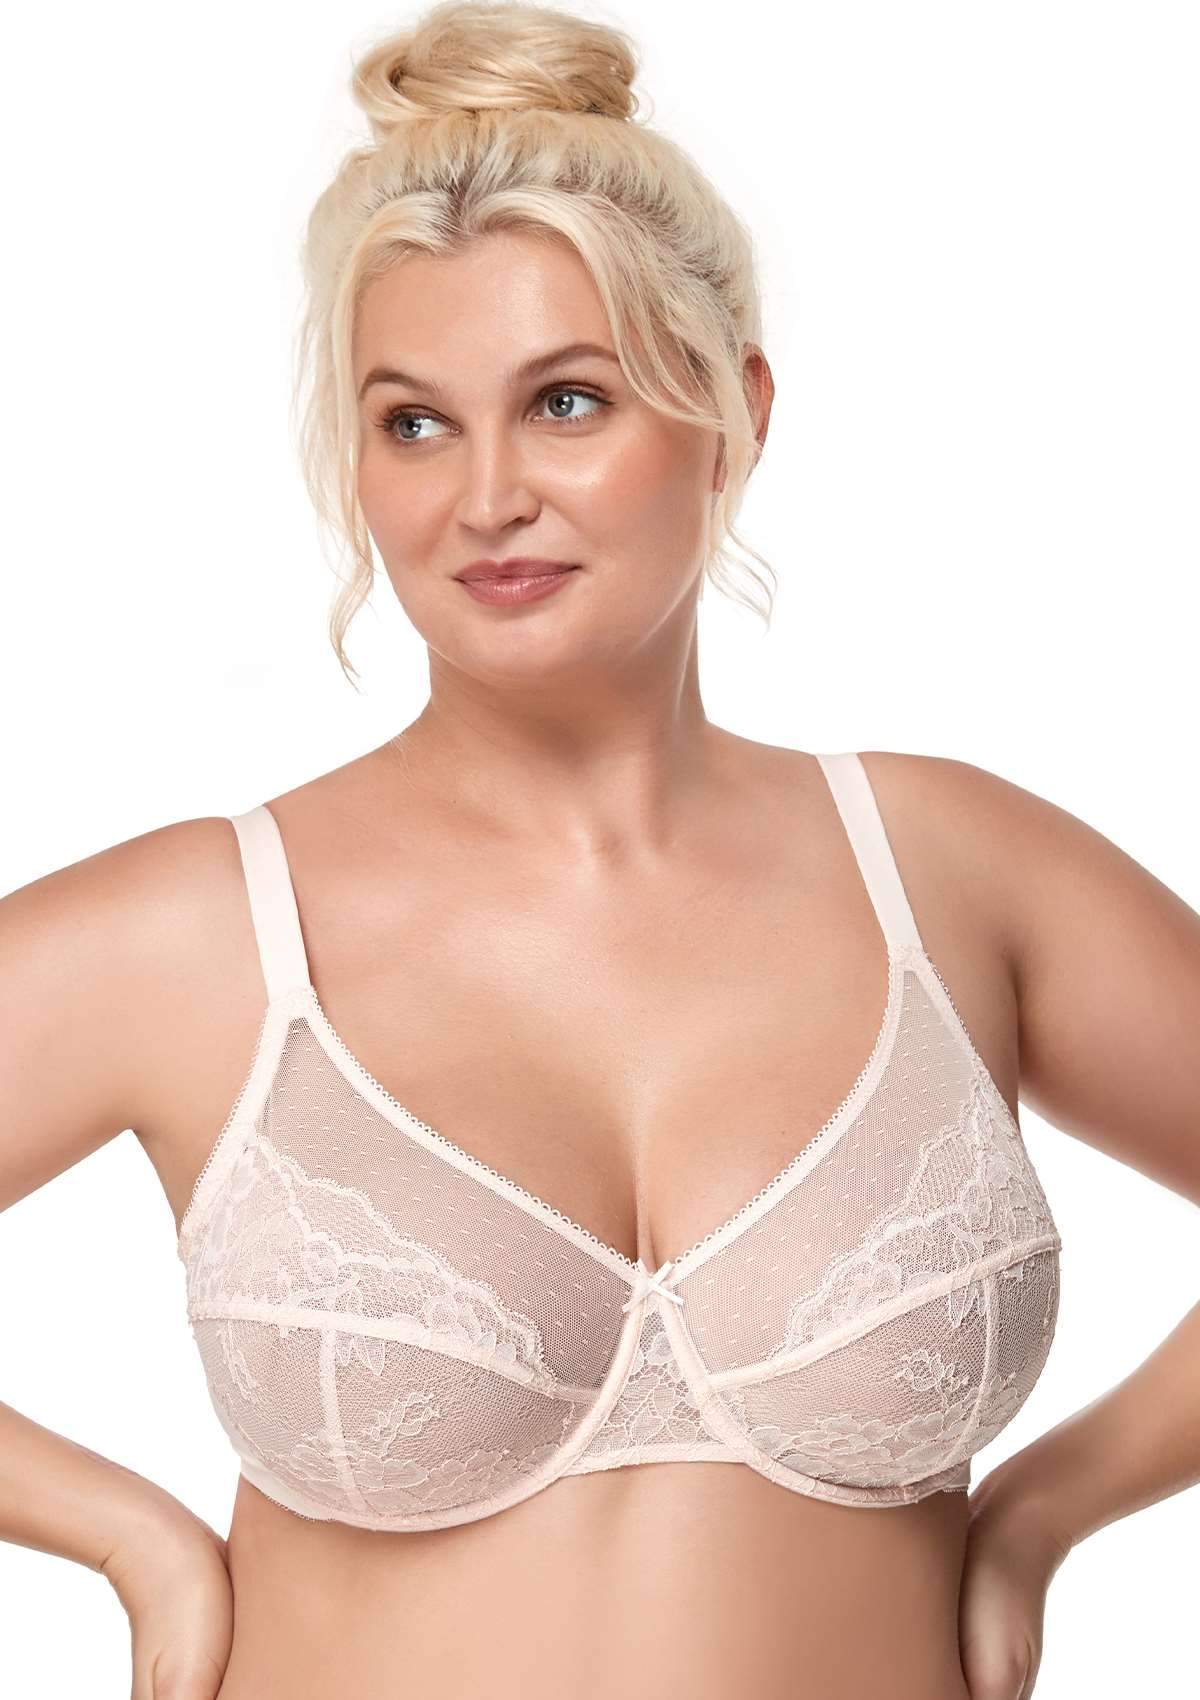 HSIA Enchante Lacy Bra: Comfy Sheer Lace Bra With Lift - Dusty Peach / 38 / G